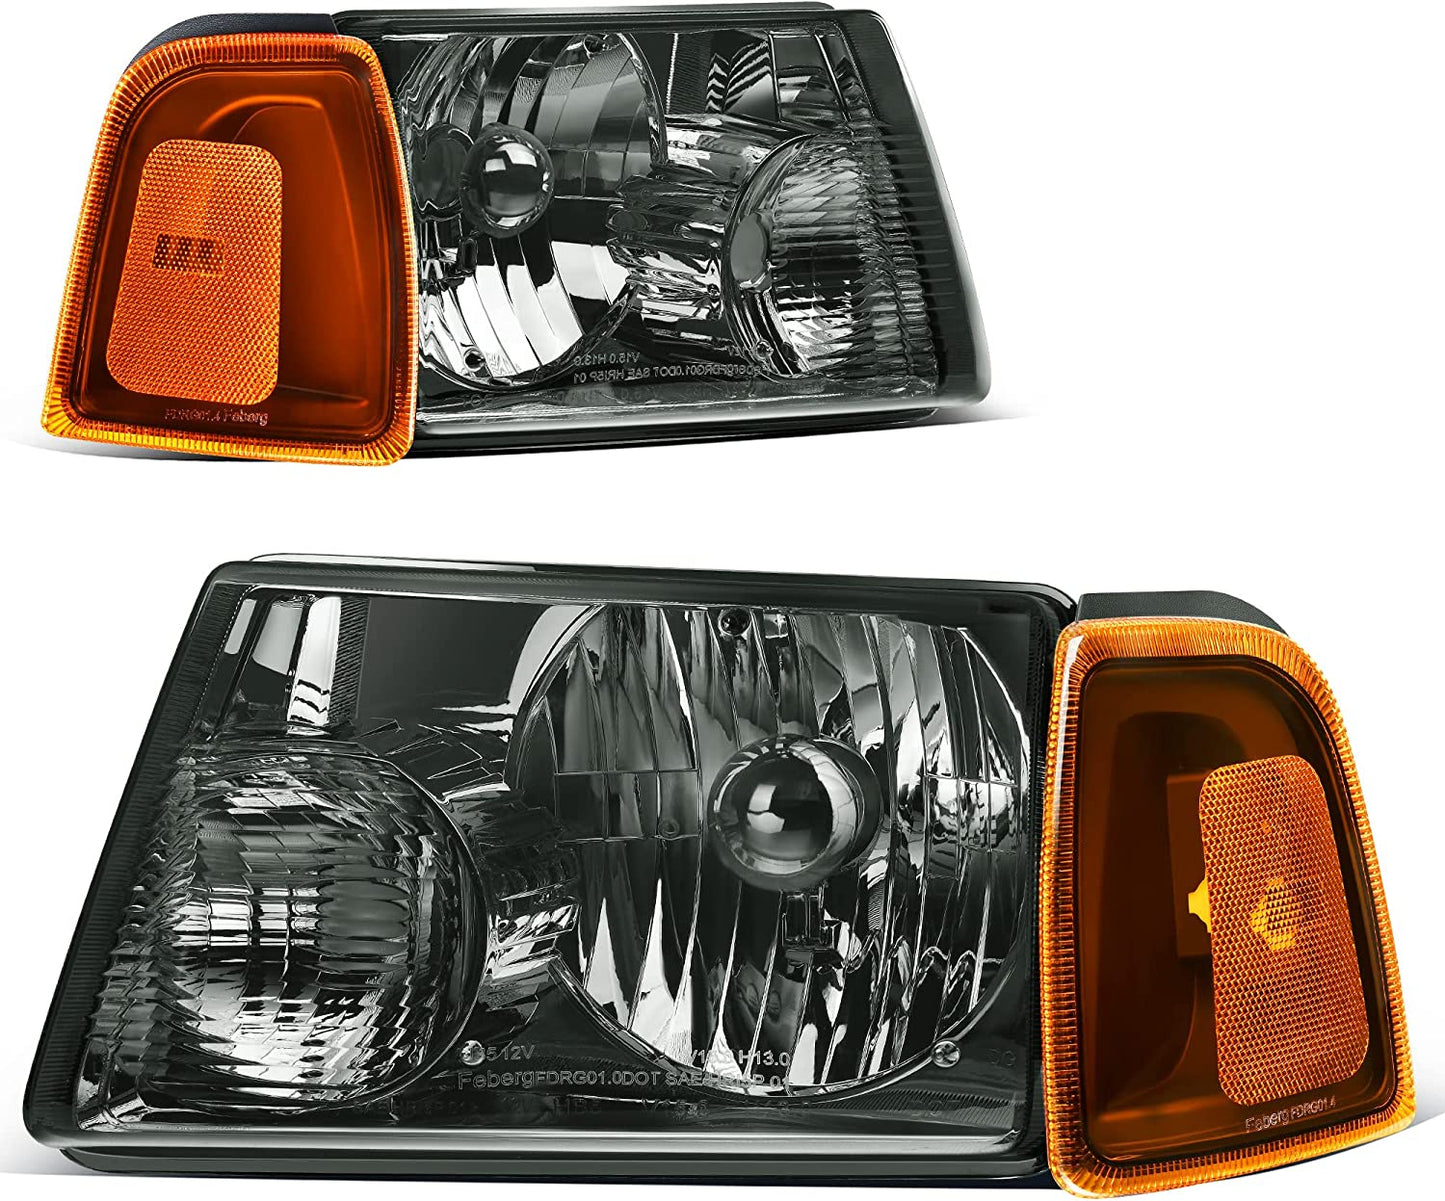 AUTOSAVER88 LED DRL Headlight Assembly Compatible with 2001-2011 Ford Ranger, Pair Headlights w/Daytime Running Light, Chrome Housing, Amber Reflector